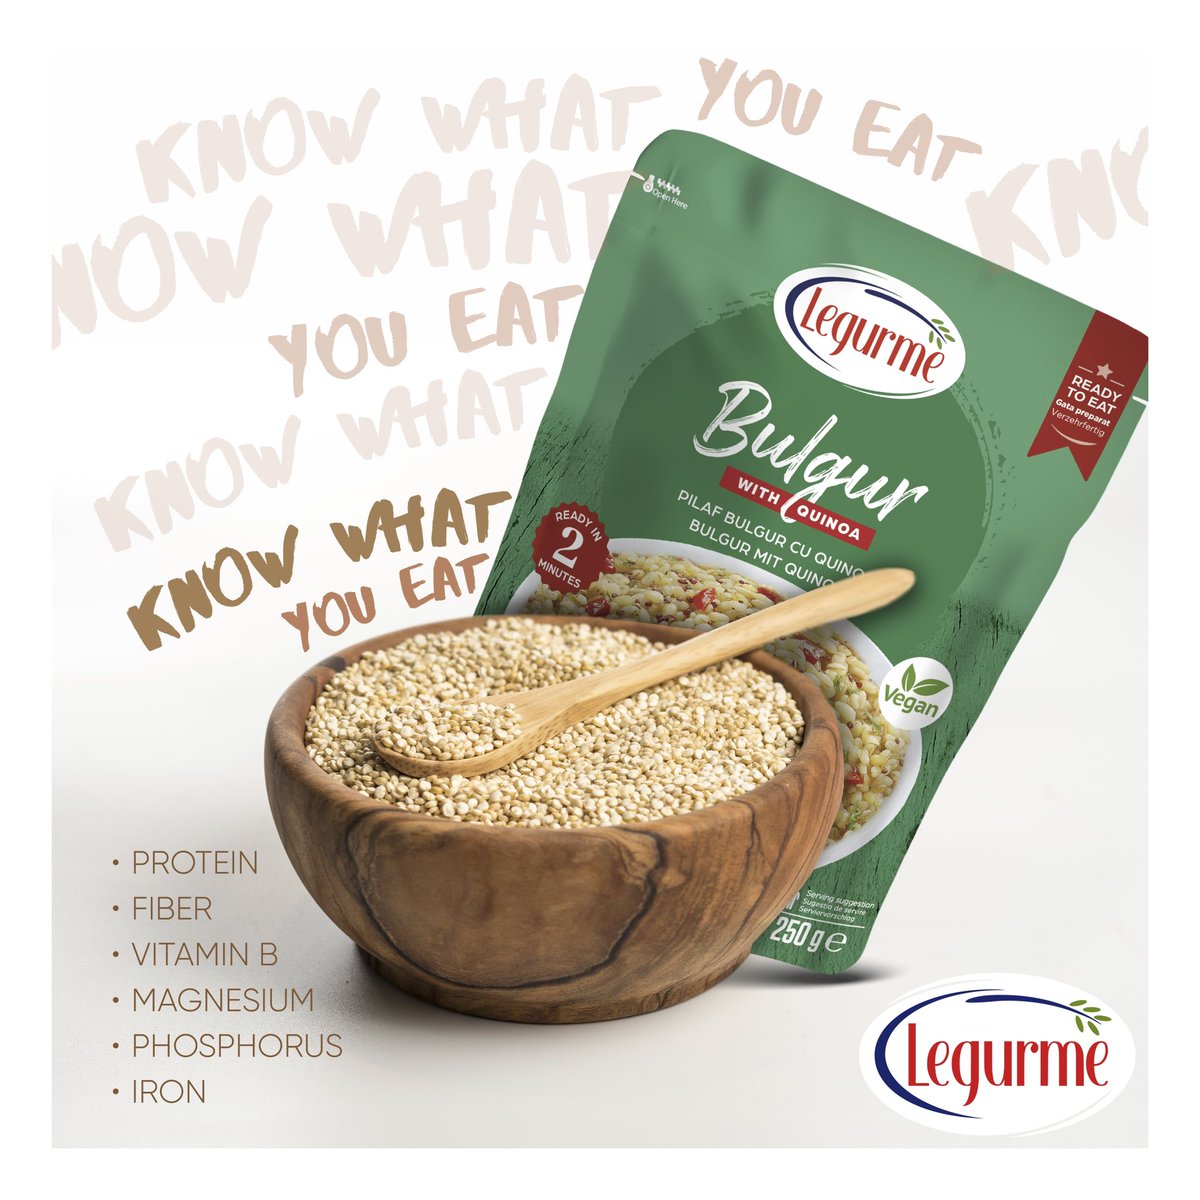 Do you know what you eat?
As Legurme, we care very much that the foods you consume are good for you. That's why we fill our packages with both taste and health!

Legurme is a brand of Yayla Agro Gıda Inc.

#Legurme #YYLGD #Yayla #KnowWhatYouEat #Quinoa #Bulgur